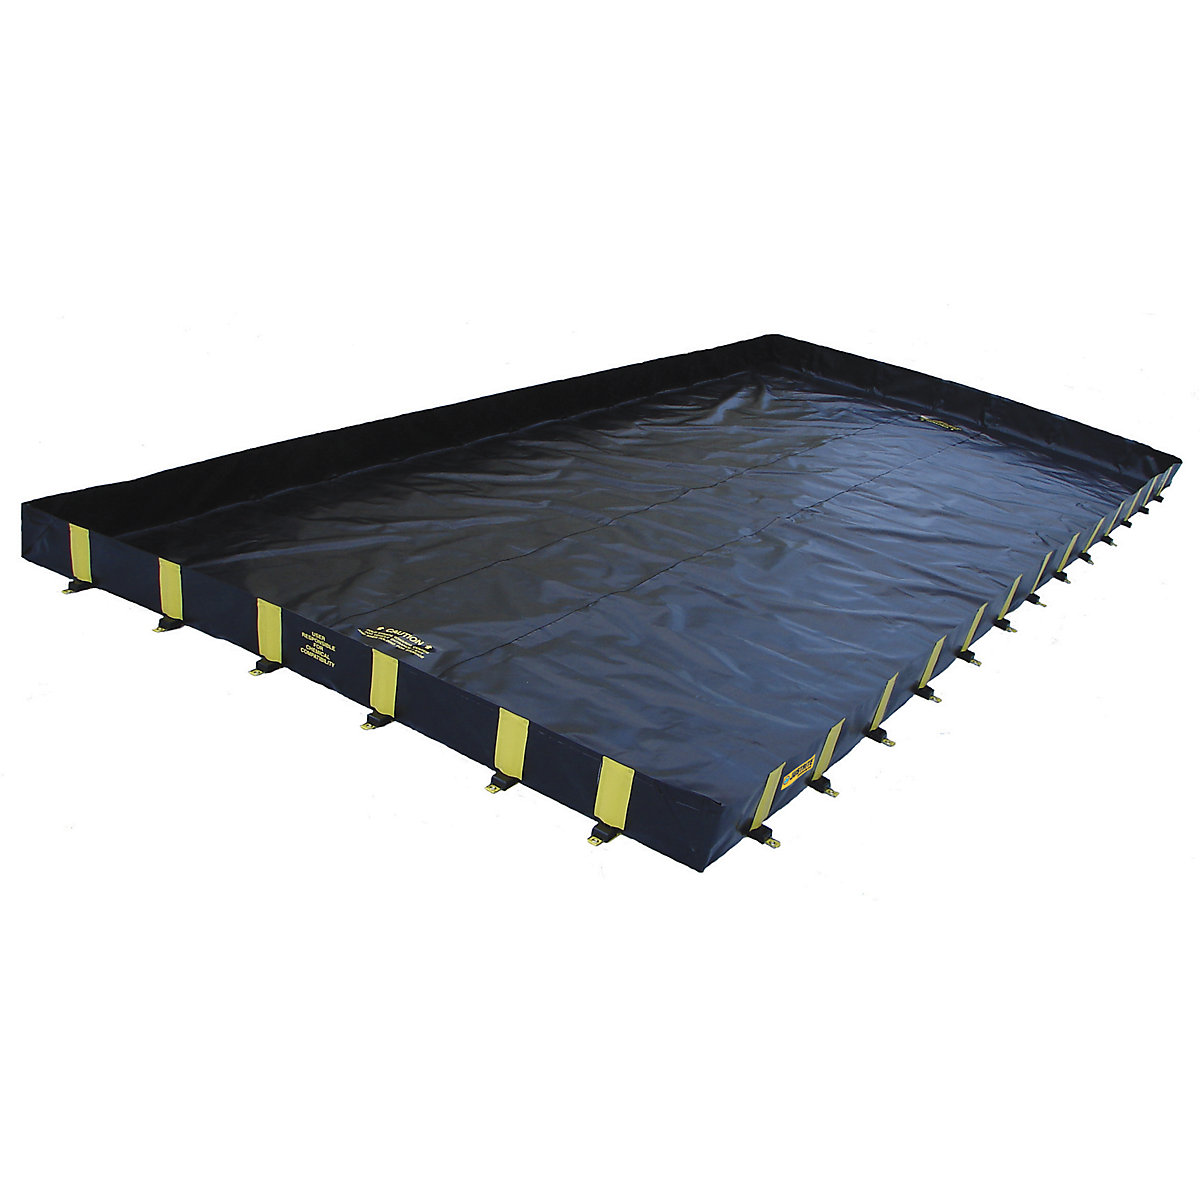 QuickBerm® XT rigid lock folding tray – Justrite, for frequent traffic, LxW 8.5 x 3.7 m-15